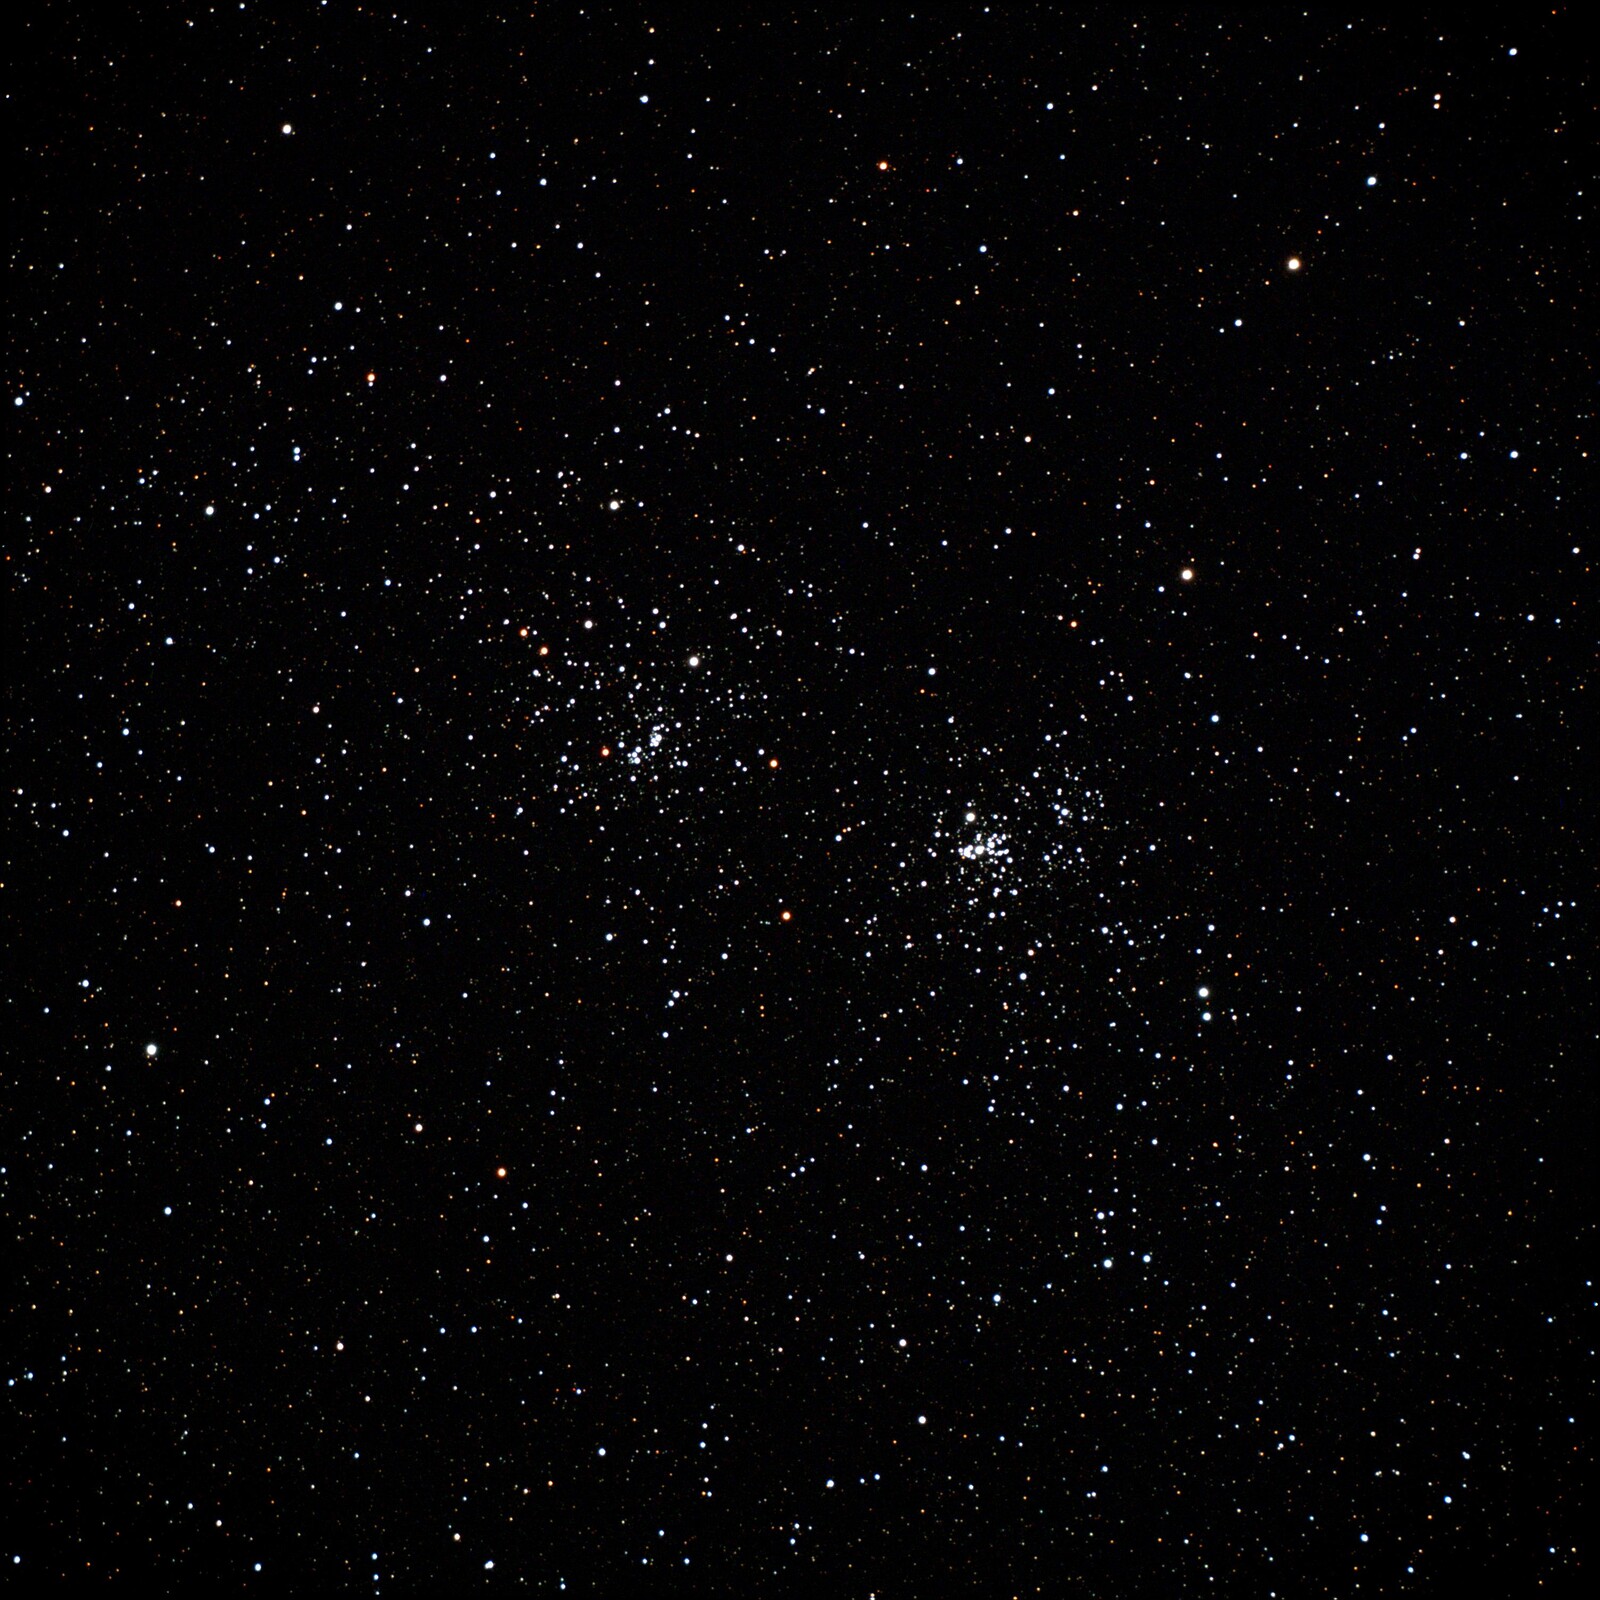 Double Cluster 9 x 10s